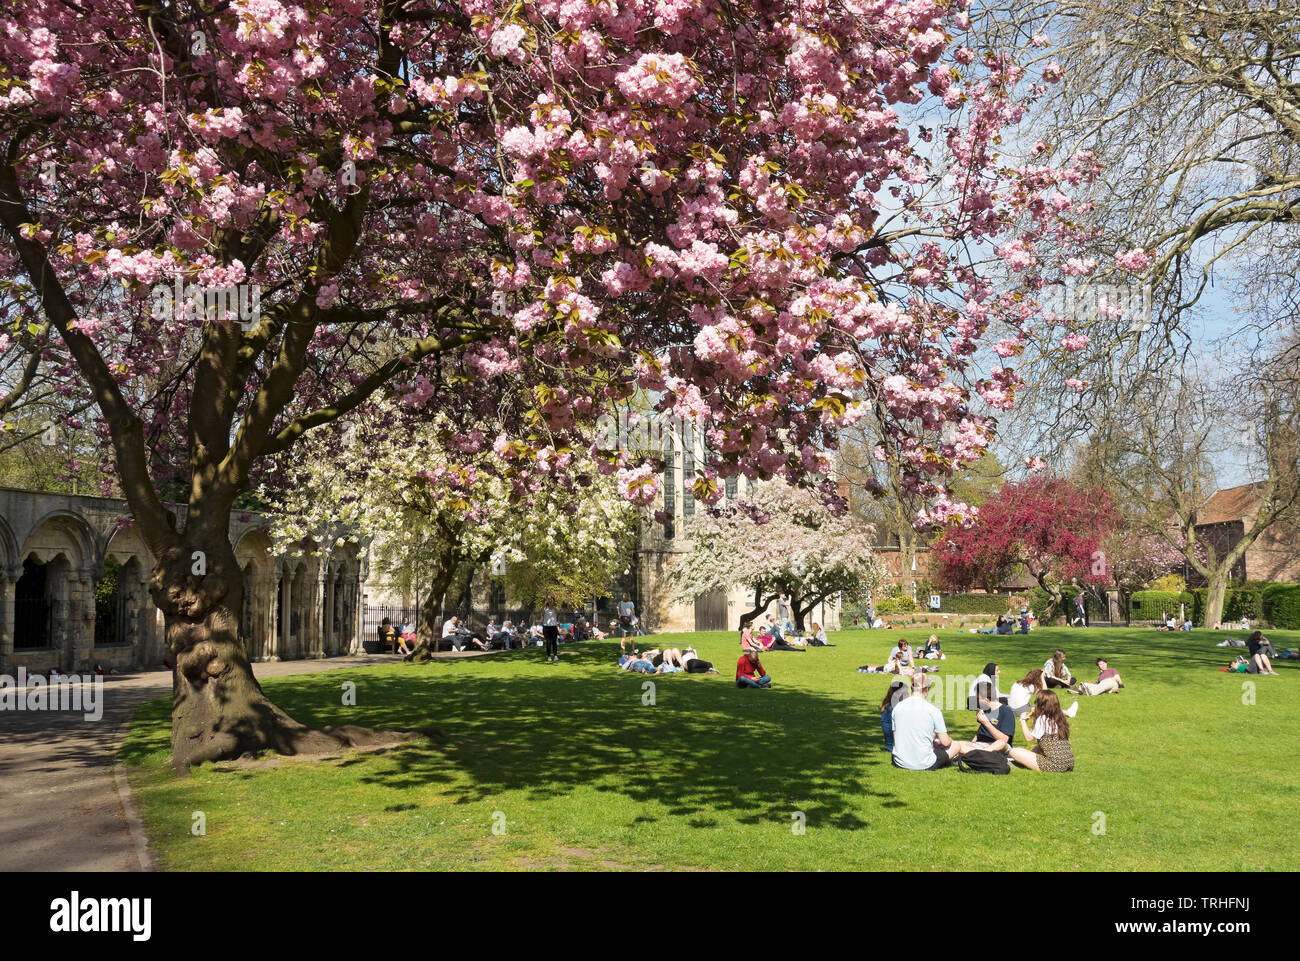 People sitting outside outdoors relaxing in the spring sunshine Deans Park York North Yorkshire England UK United Kingdom GB Great Britain Stock Photo